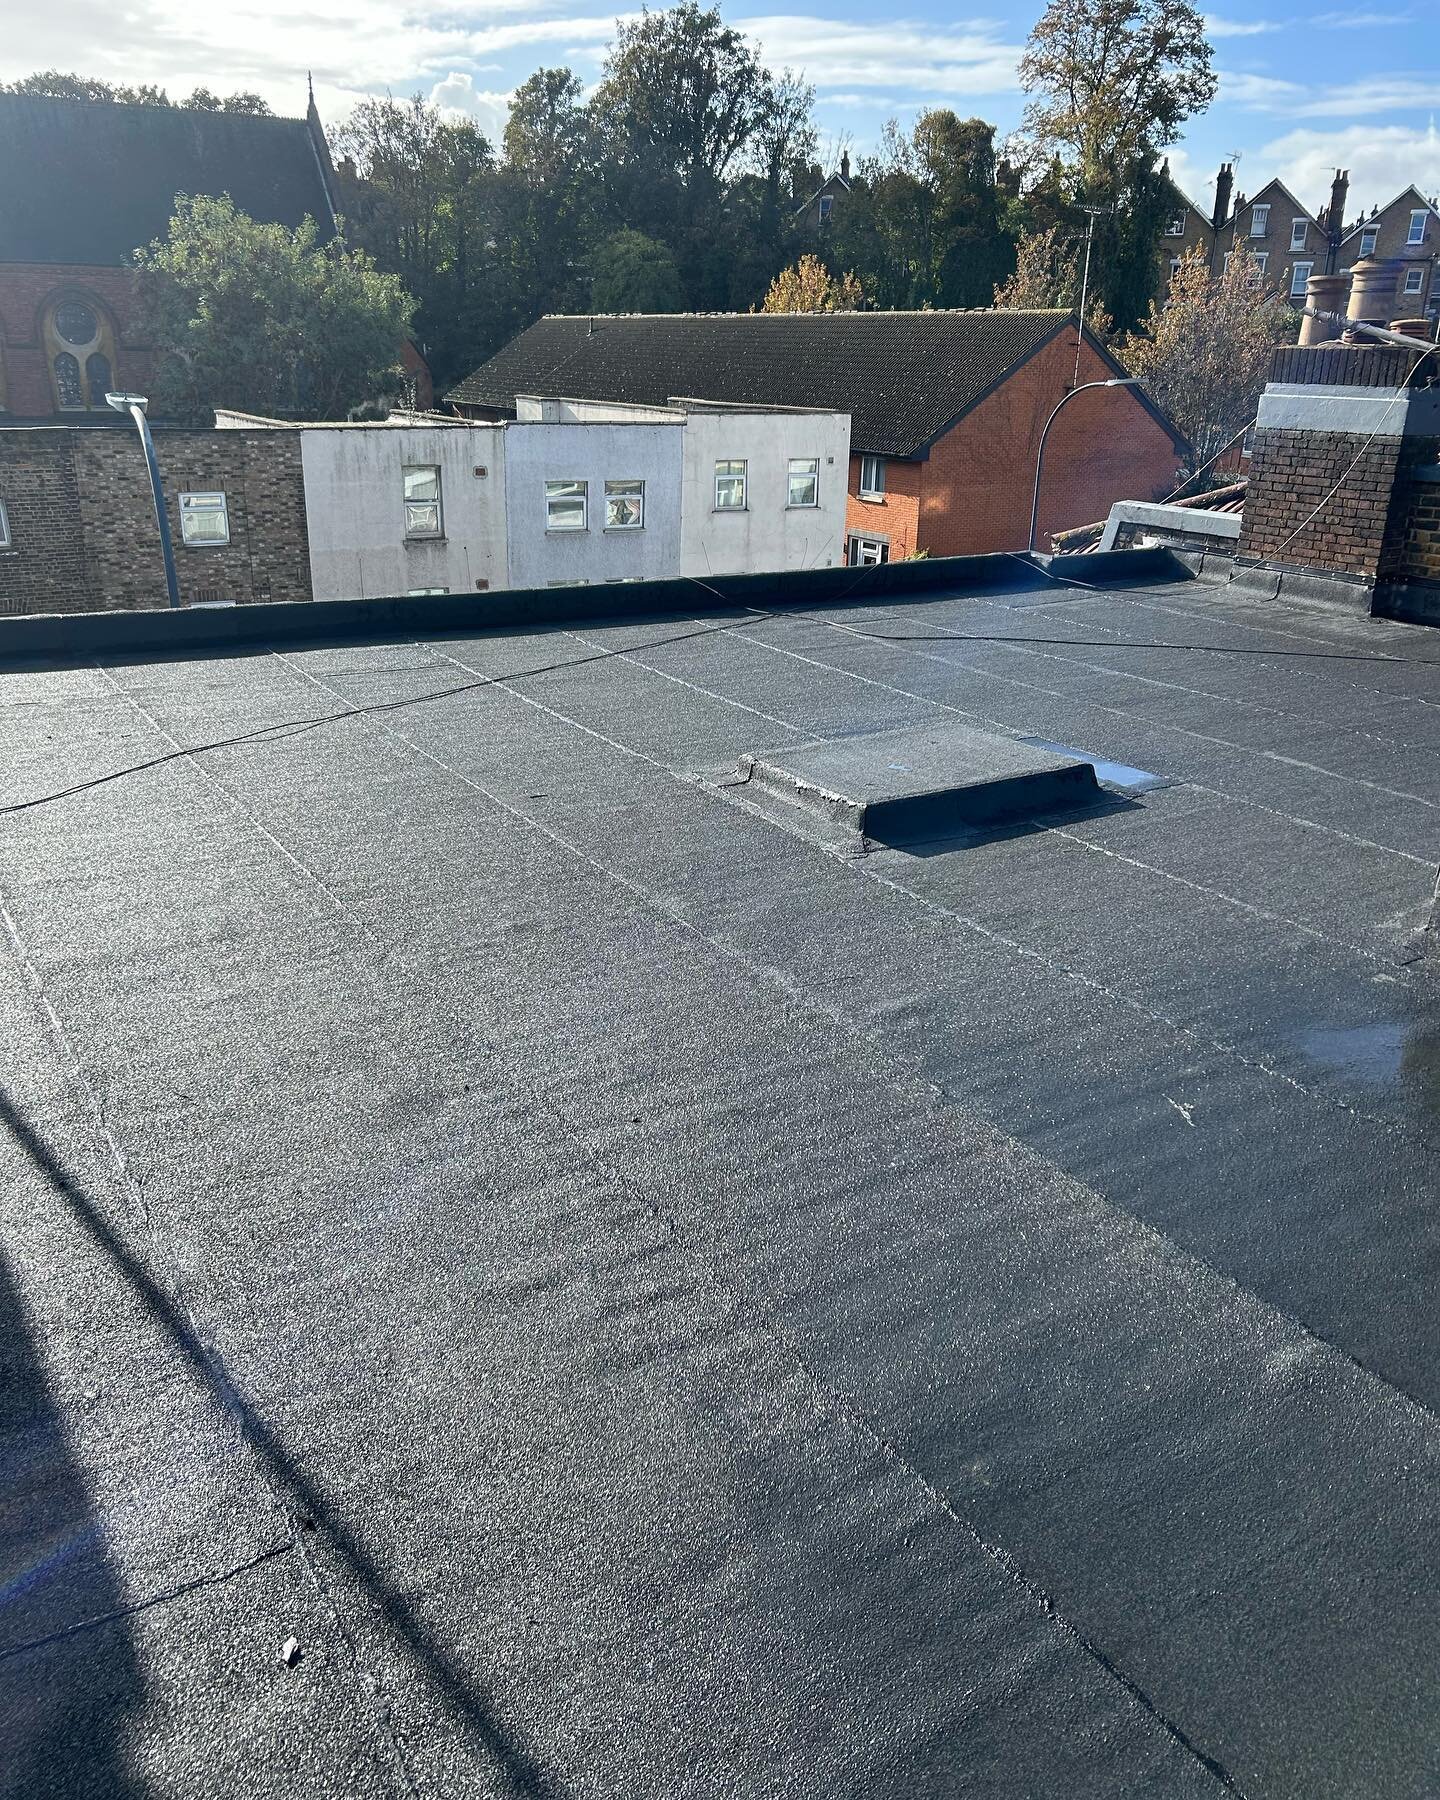 Felt overlay we just completed on the rising sun pub in lewisham we overlay the existing asphalt roof with a new touch on felt. The weather thort us all the way on this one but we got there in the end 🌧️🌧️ visit www.sapsford.Co